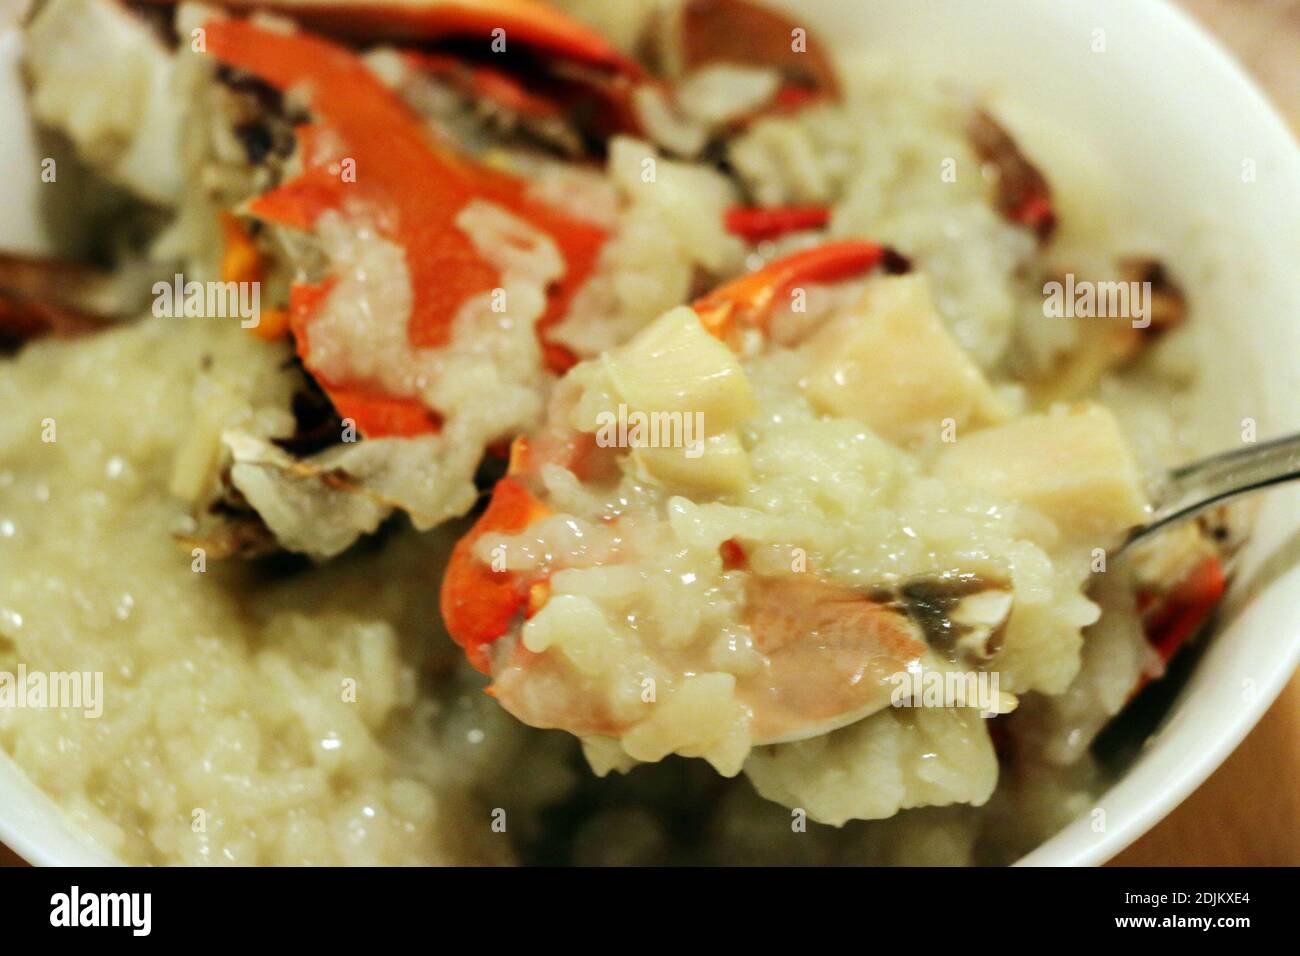 delicious asian style crab rice with vegetables Stock Photo